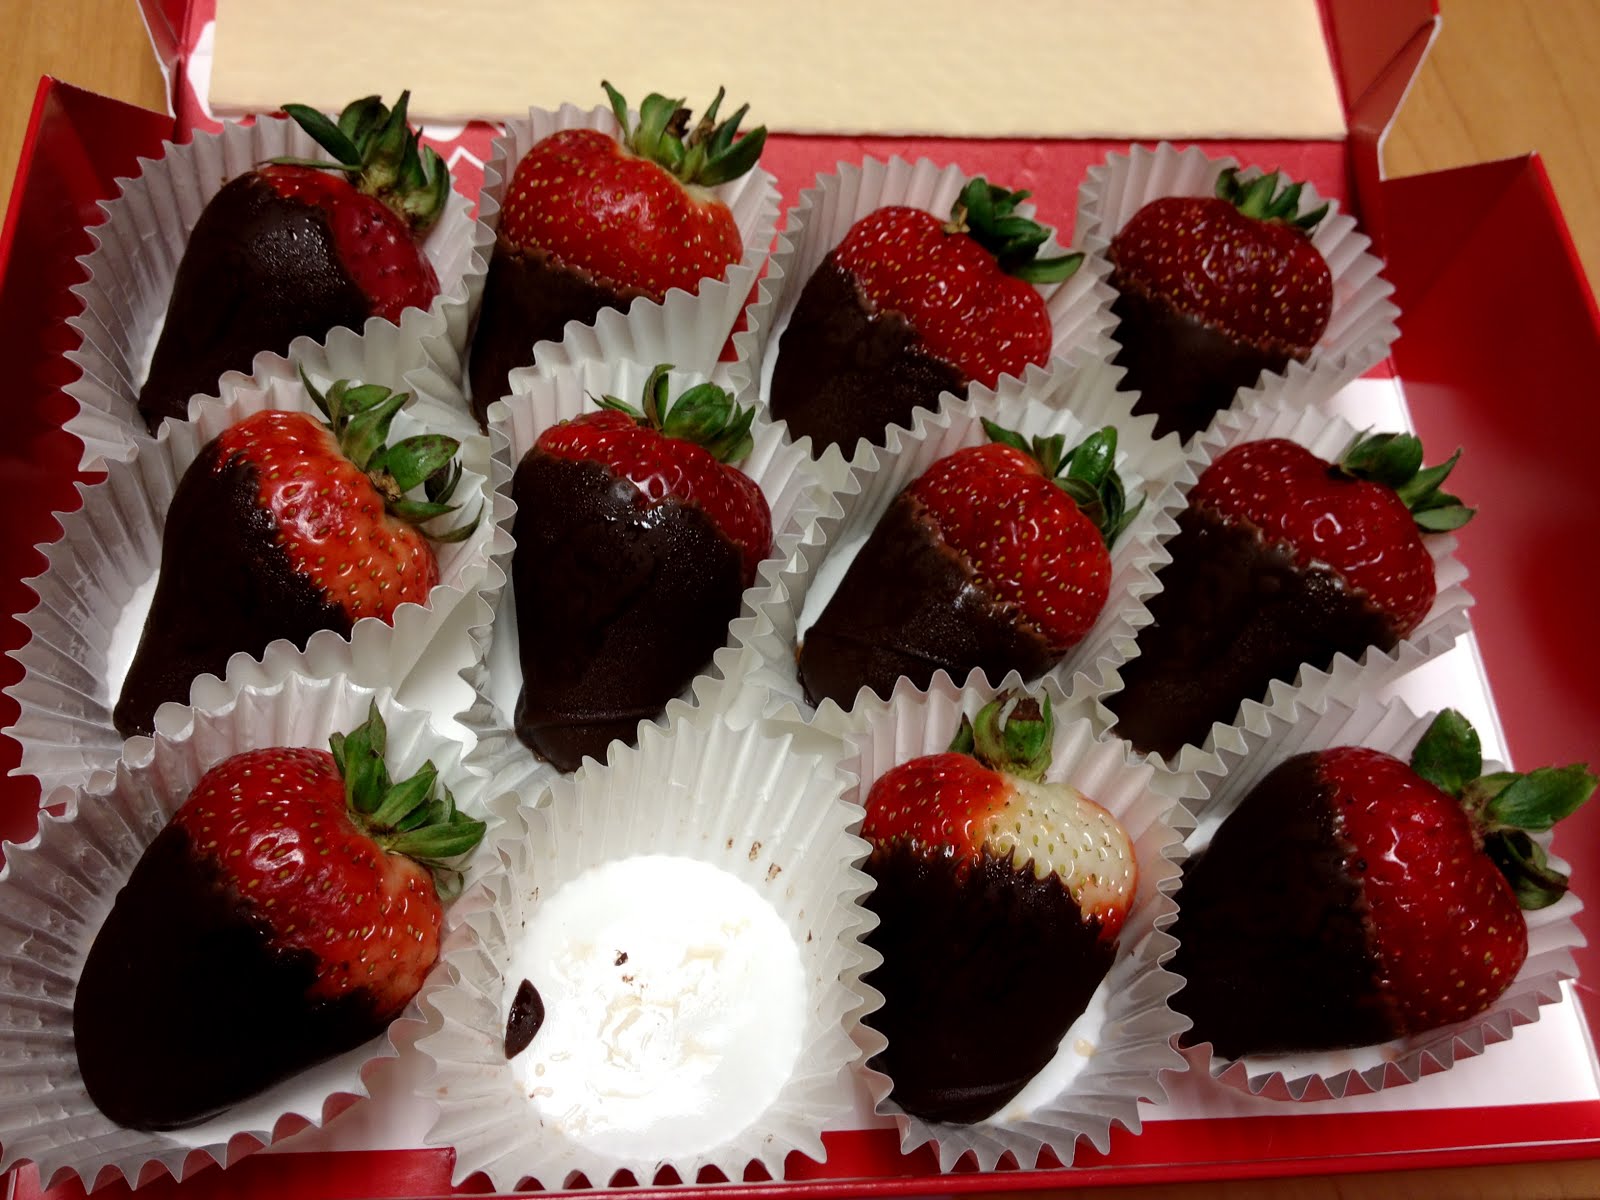 Chocolate NYC Edible Arrangement's Chocolate Dipped Strawberries